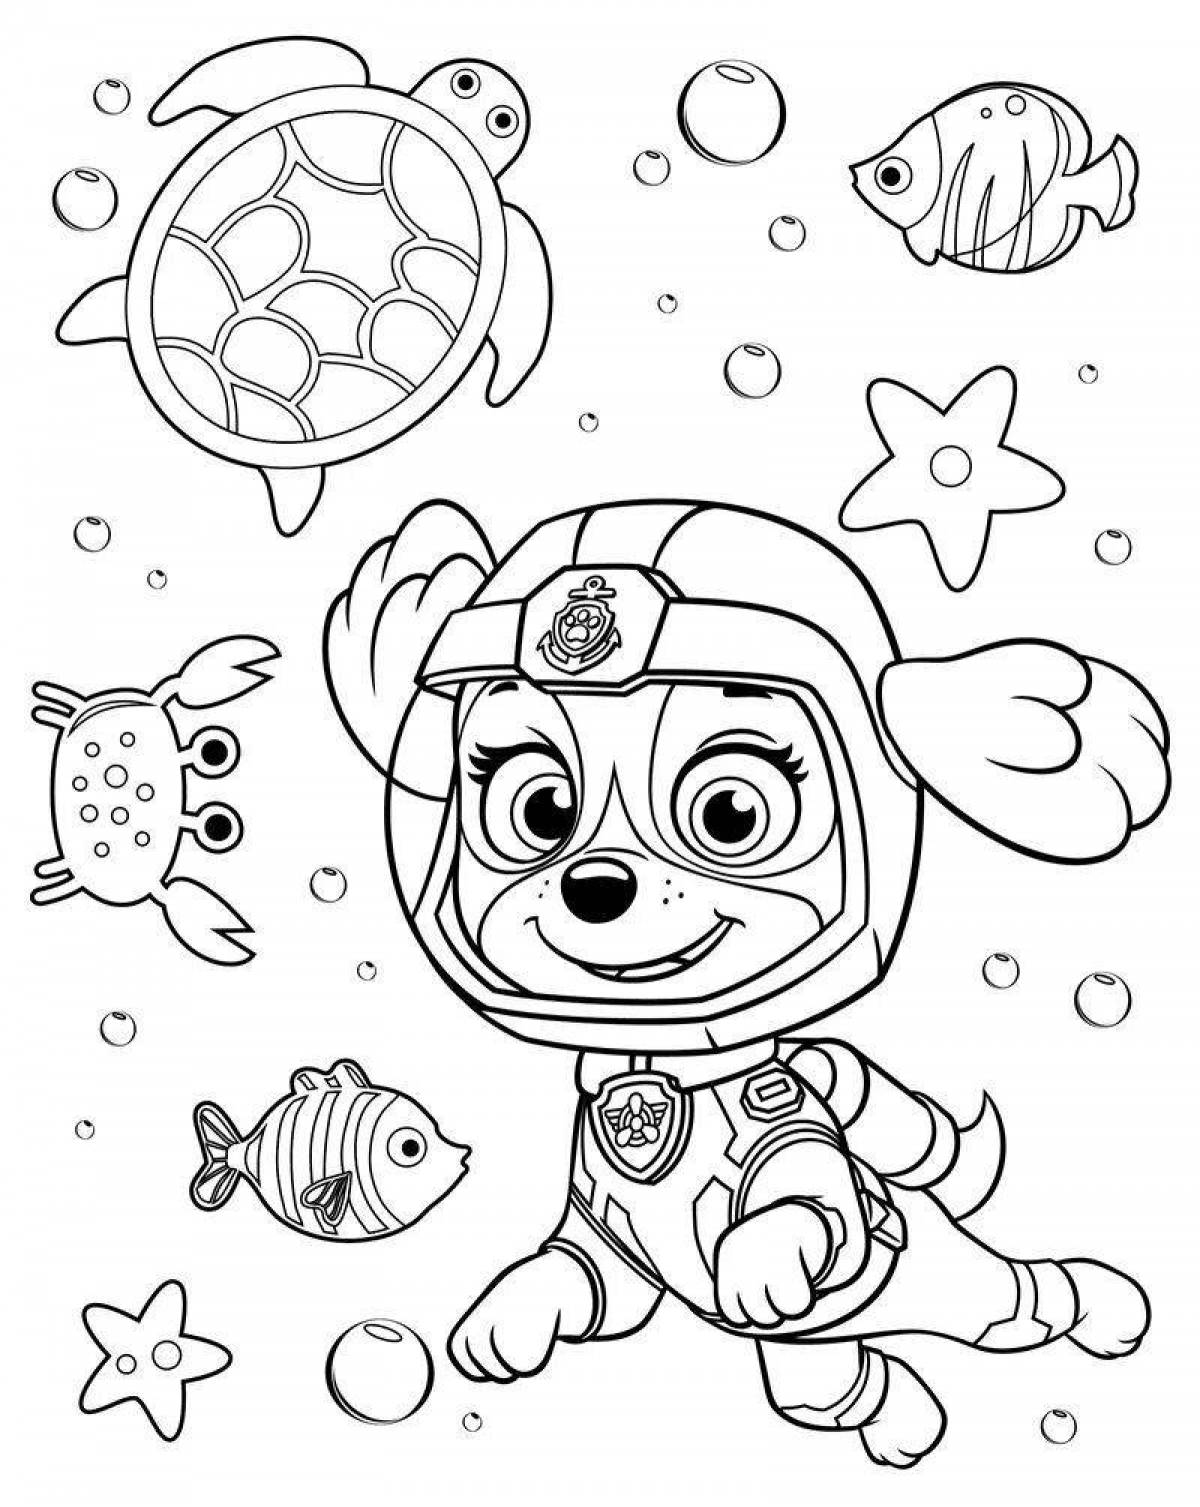 Glorious mega sky coloring page